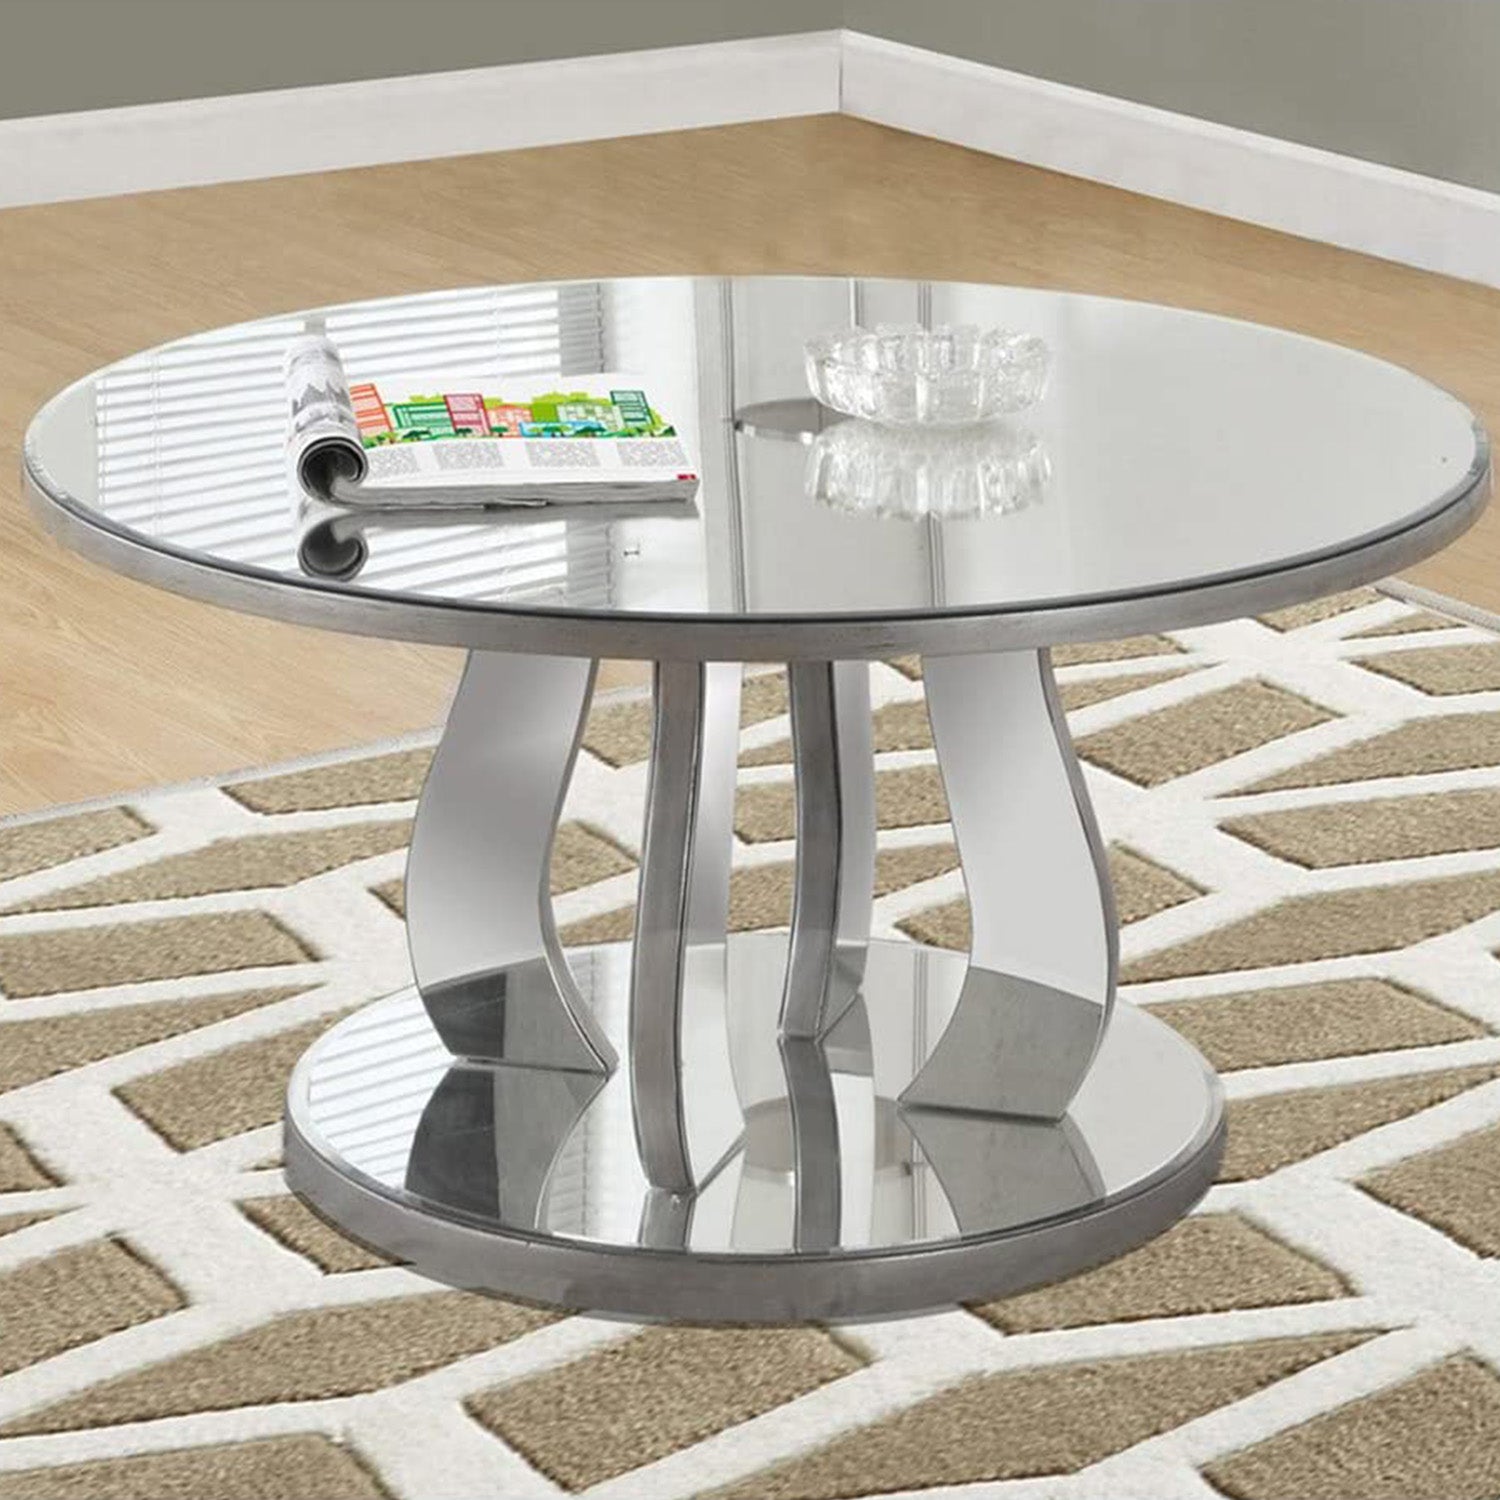 Silver Coffee Table With A Mirror Top - Team Spirit Store USA 